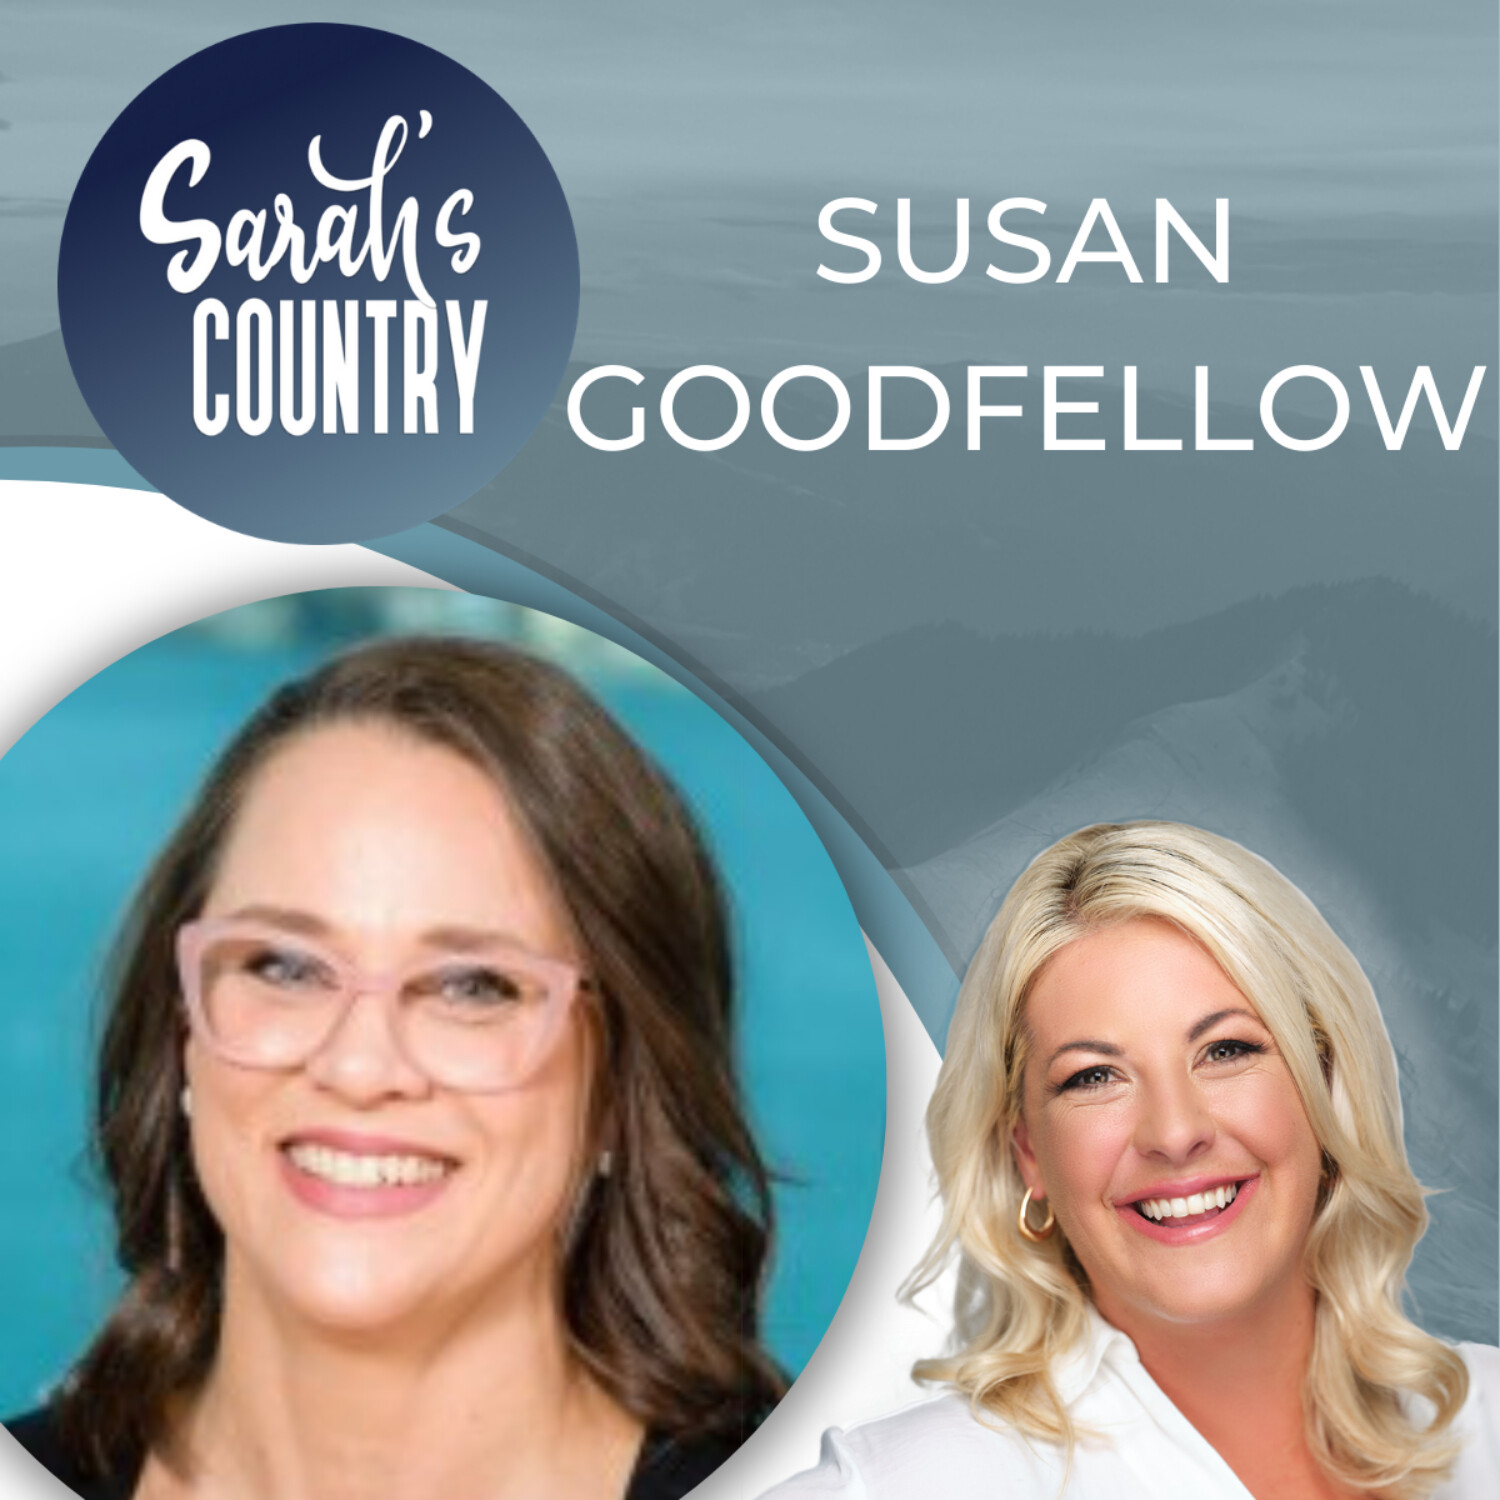 “Opportunity lies in field peas” with Susan Goodfellow